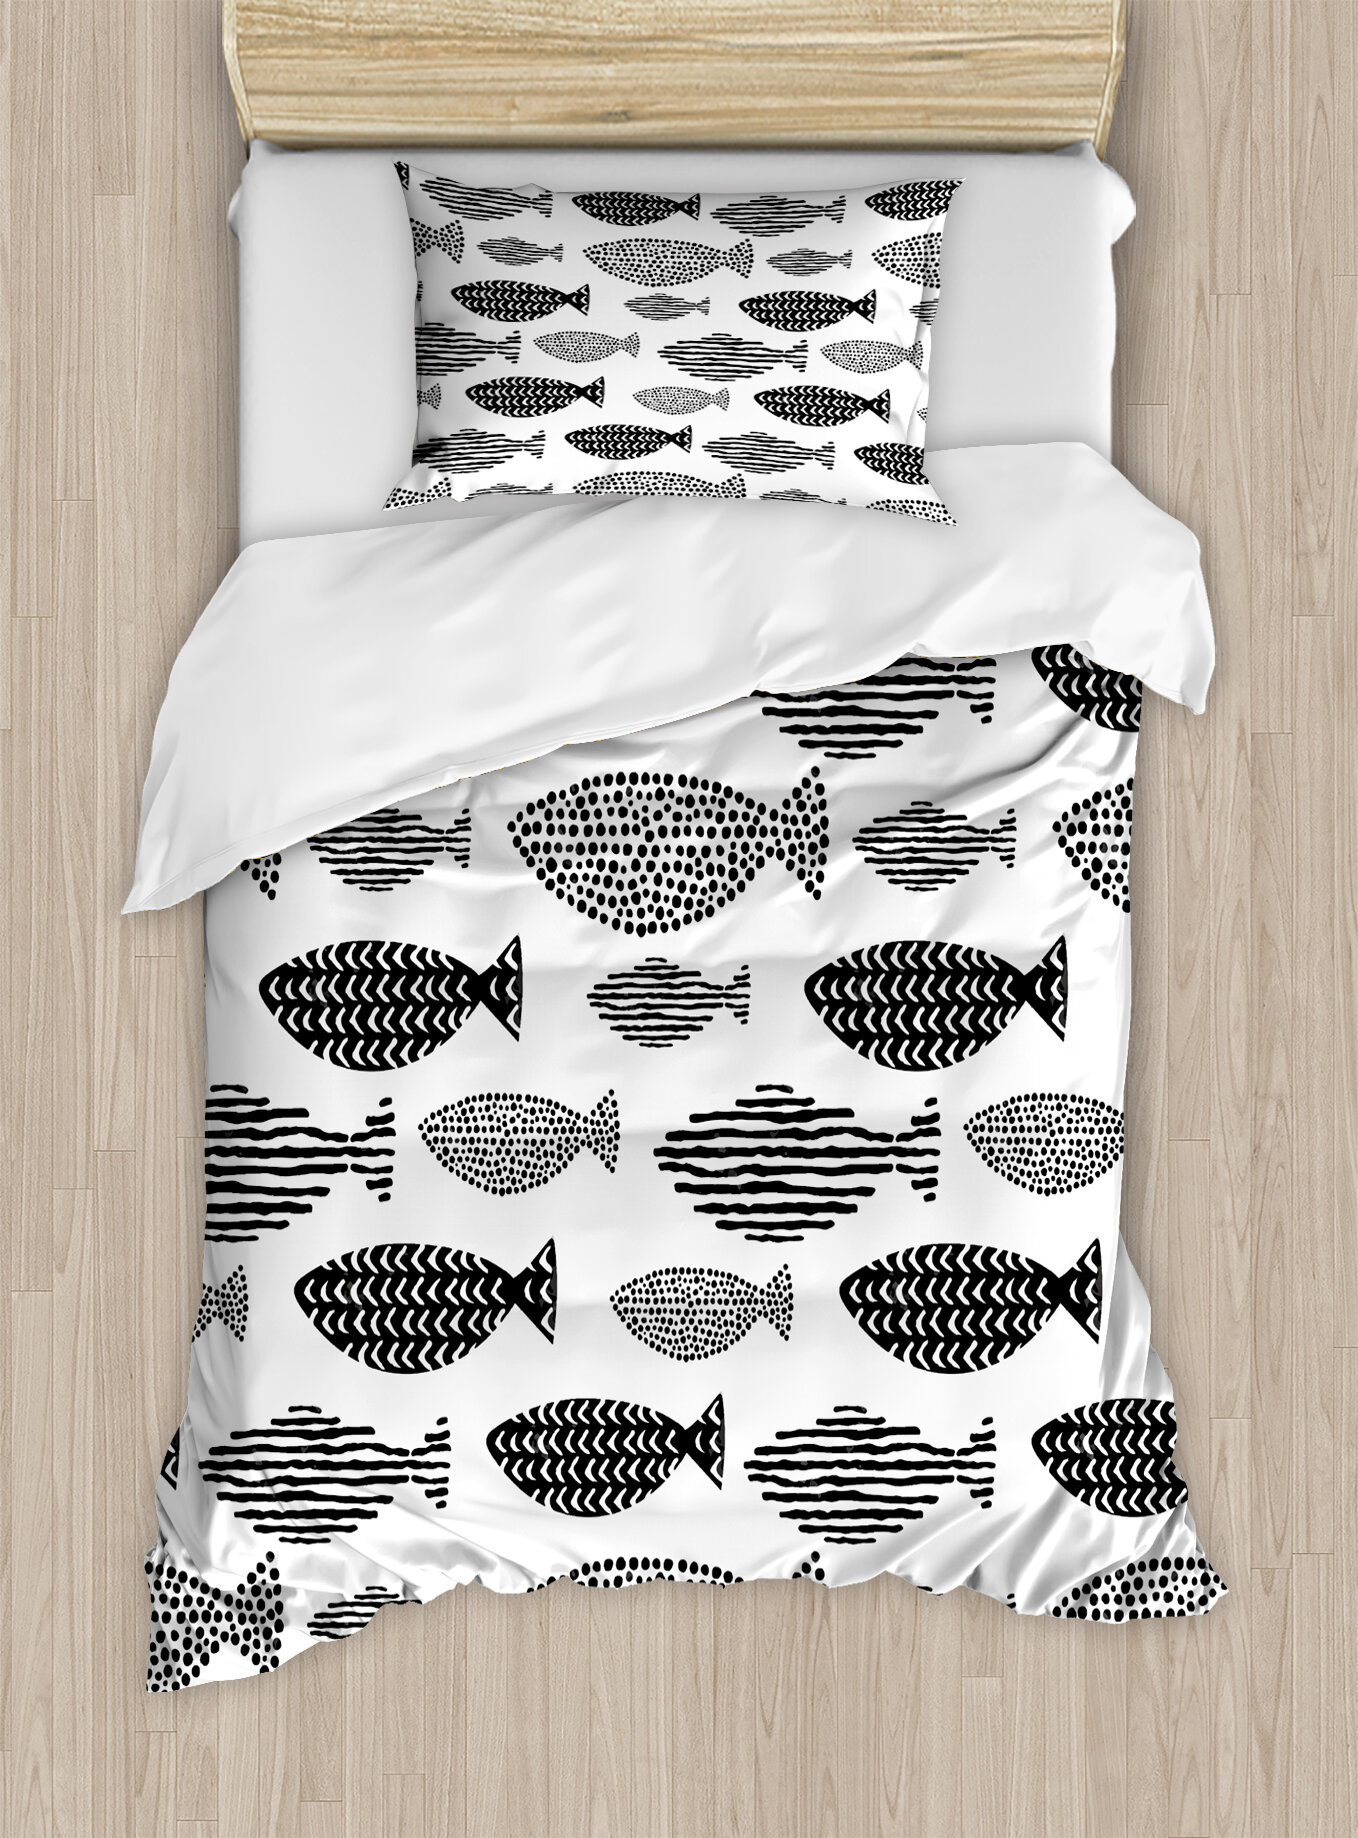 East Urban Home Ocean Animal Minimalist Fish With Pared Down Dots